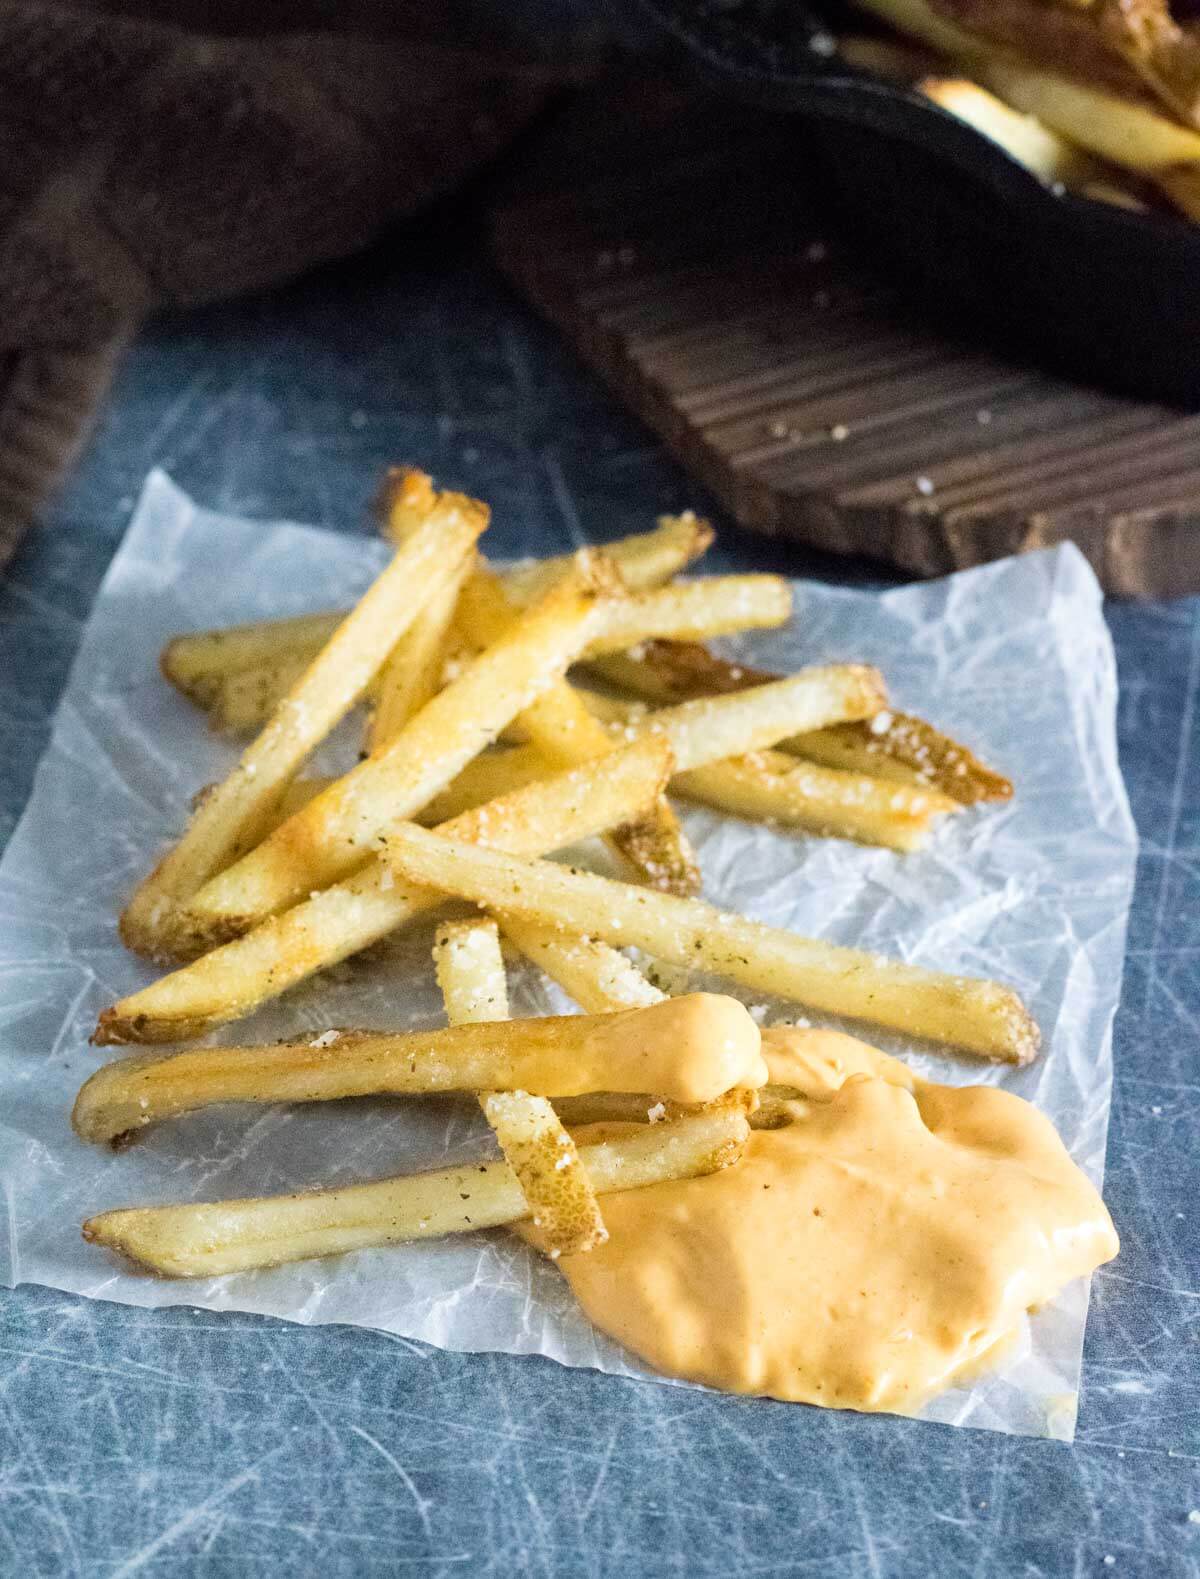 Fried truffle french fries with dipping sauce.